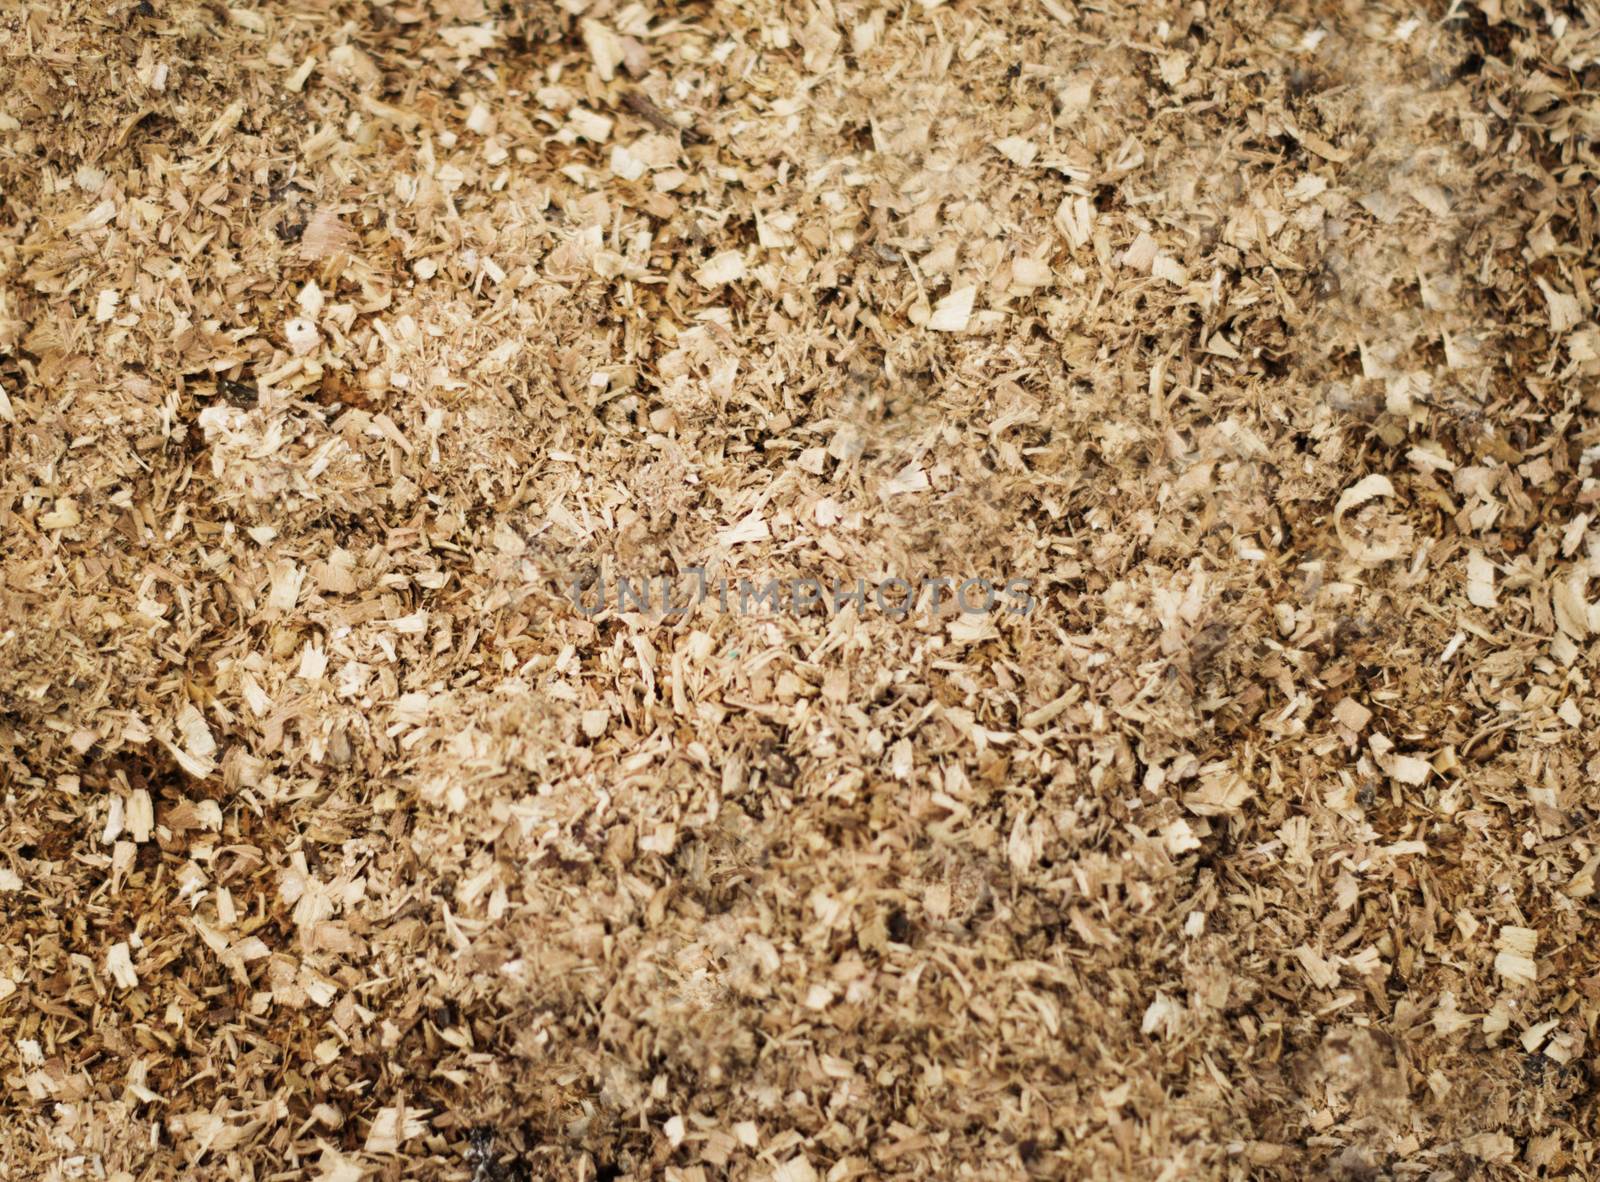 Wood Sawdust Texture Background. For your commercial and editorial use